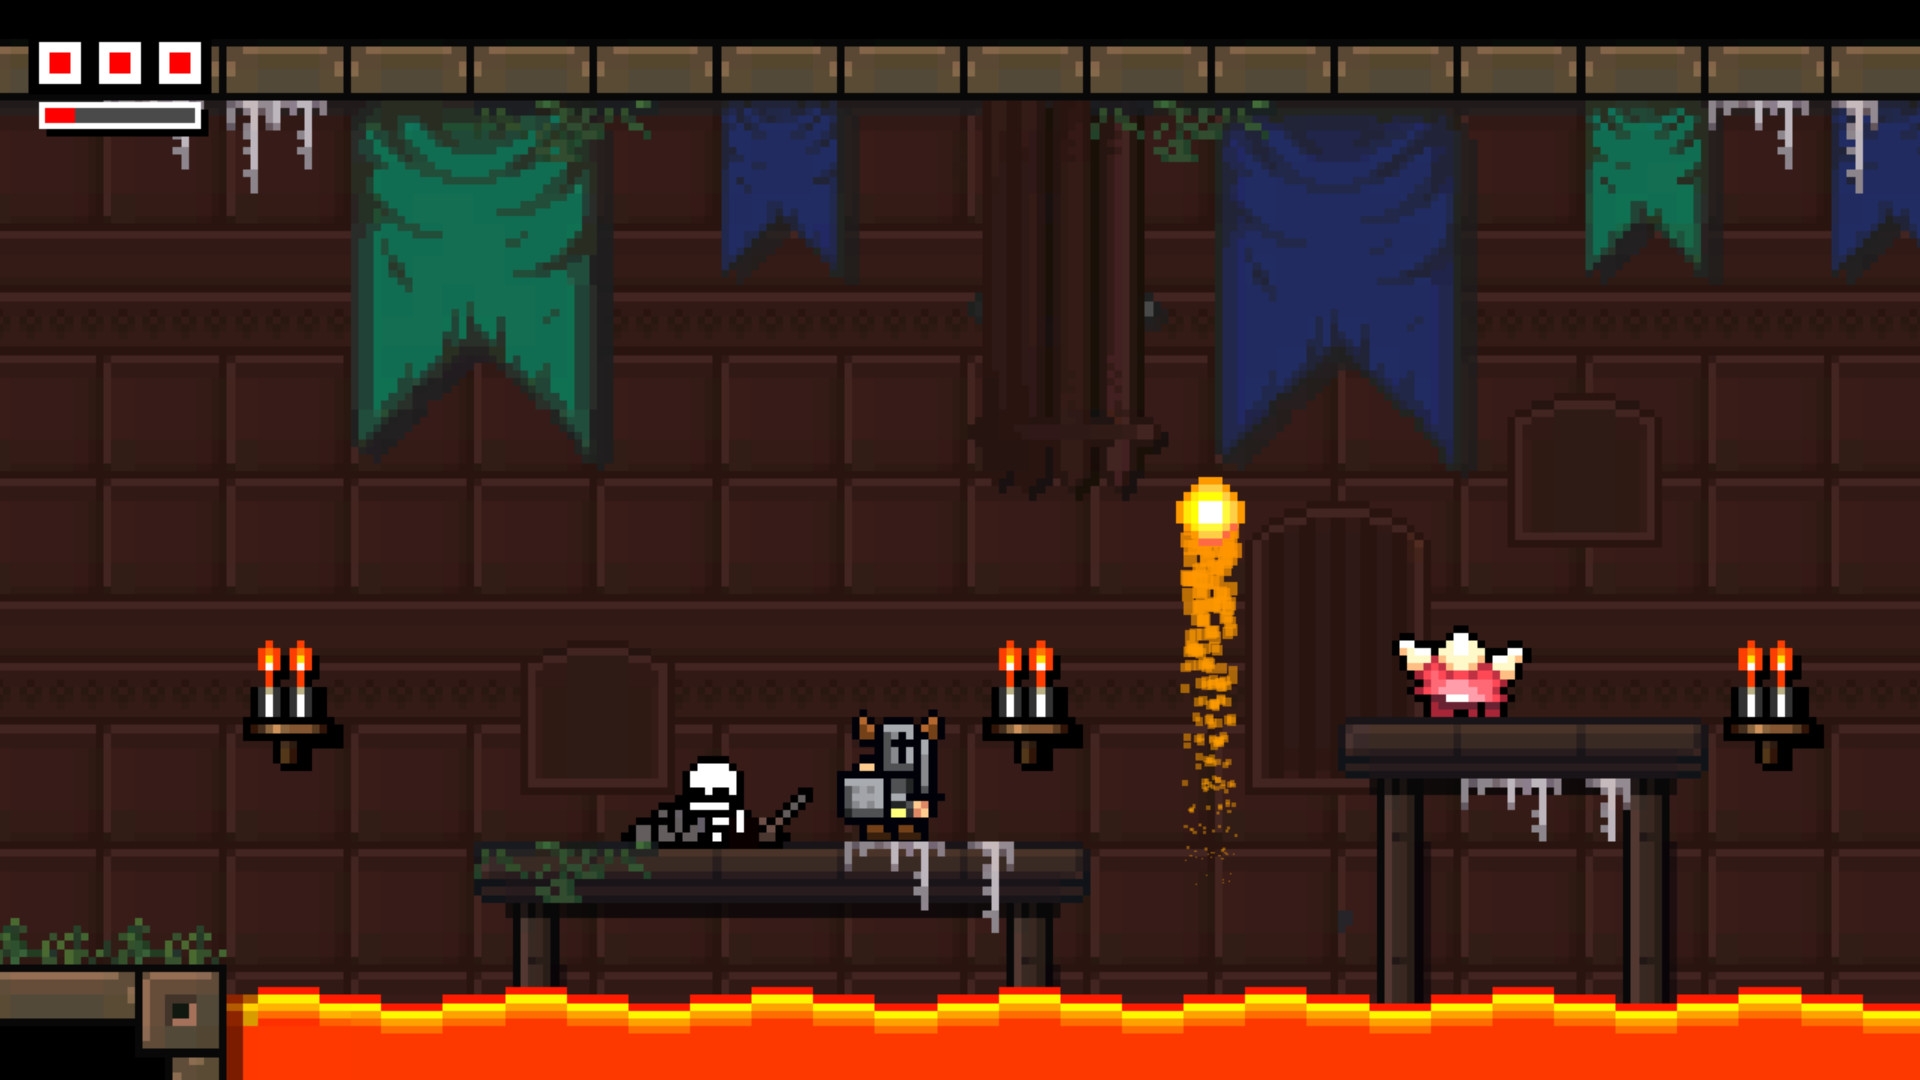 Retro-Styled 2D Action Platformer Horned Knight Arrives On PC And Console Later This Year